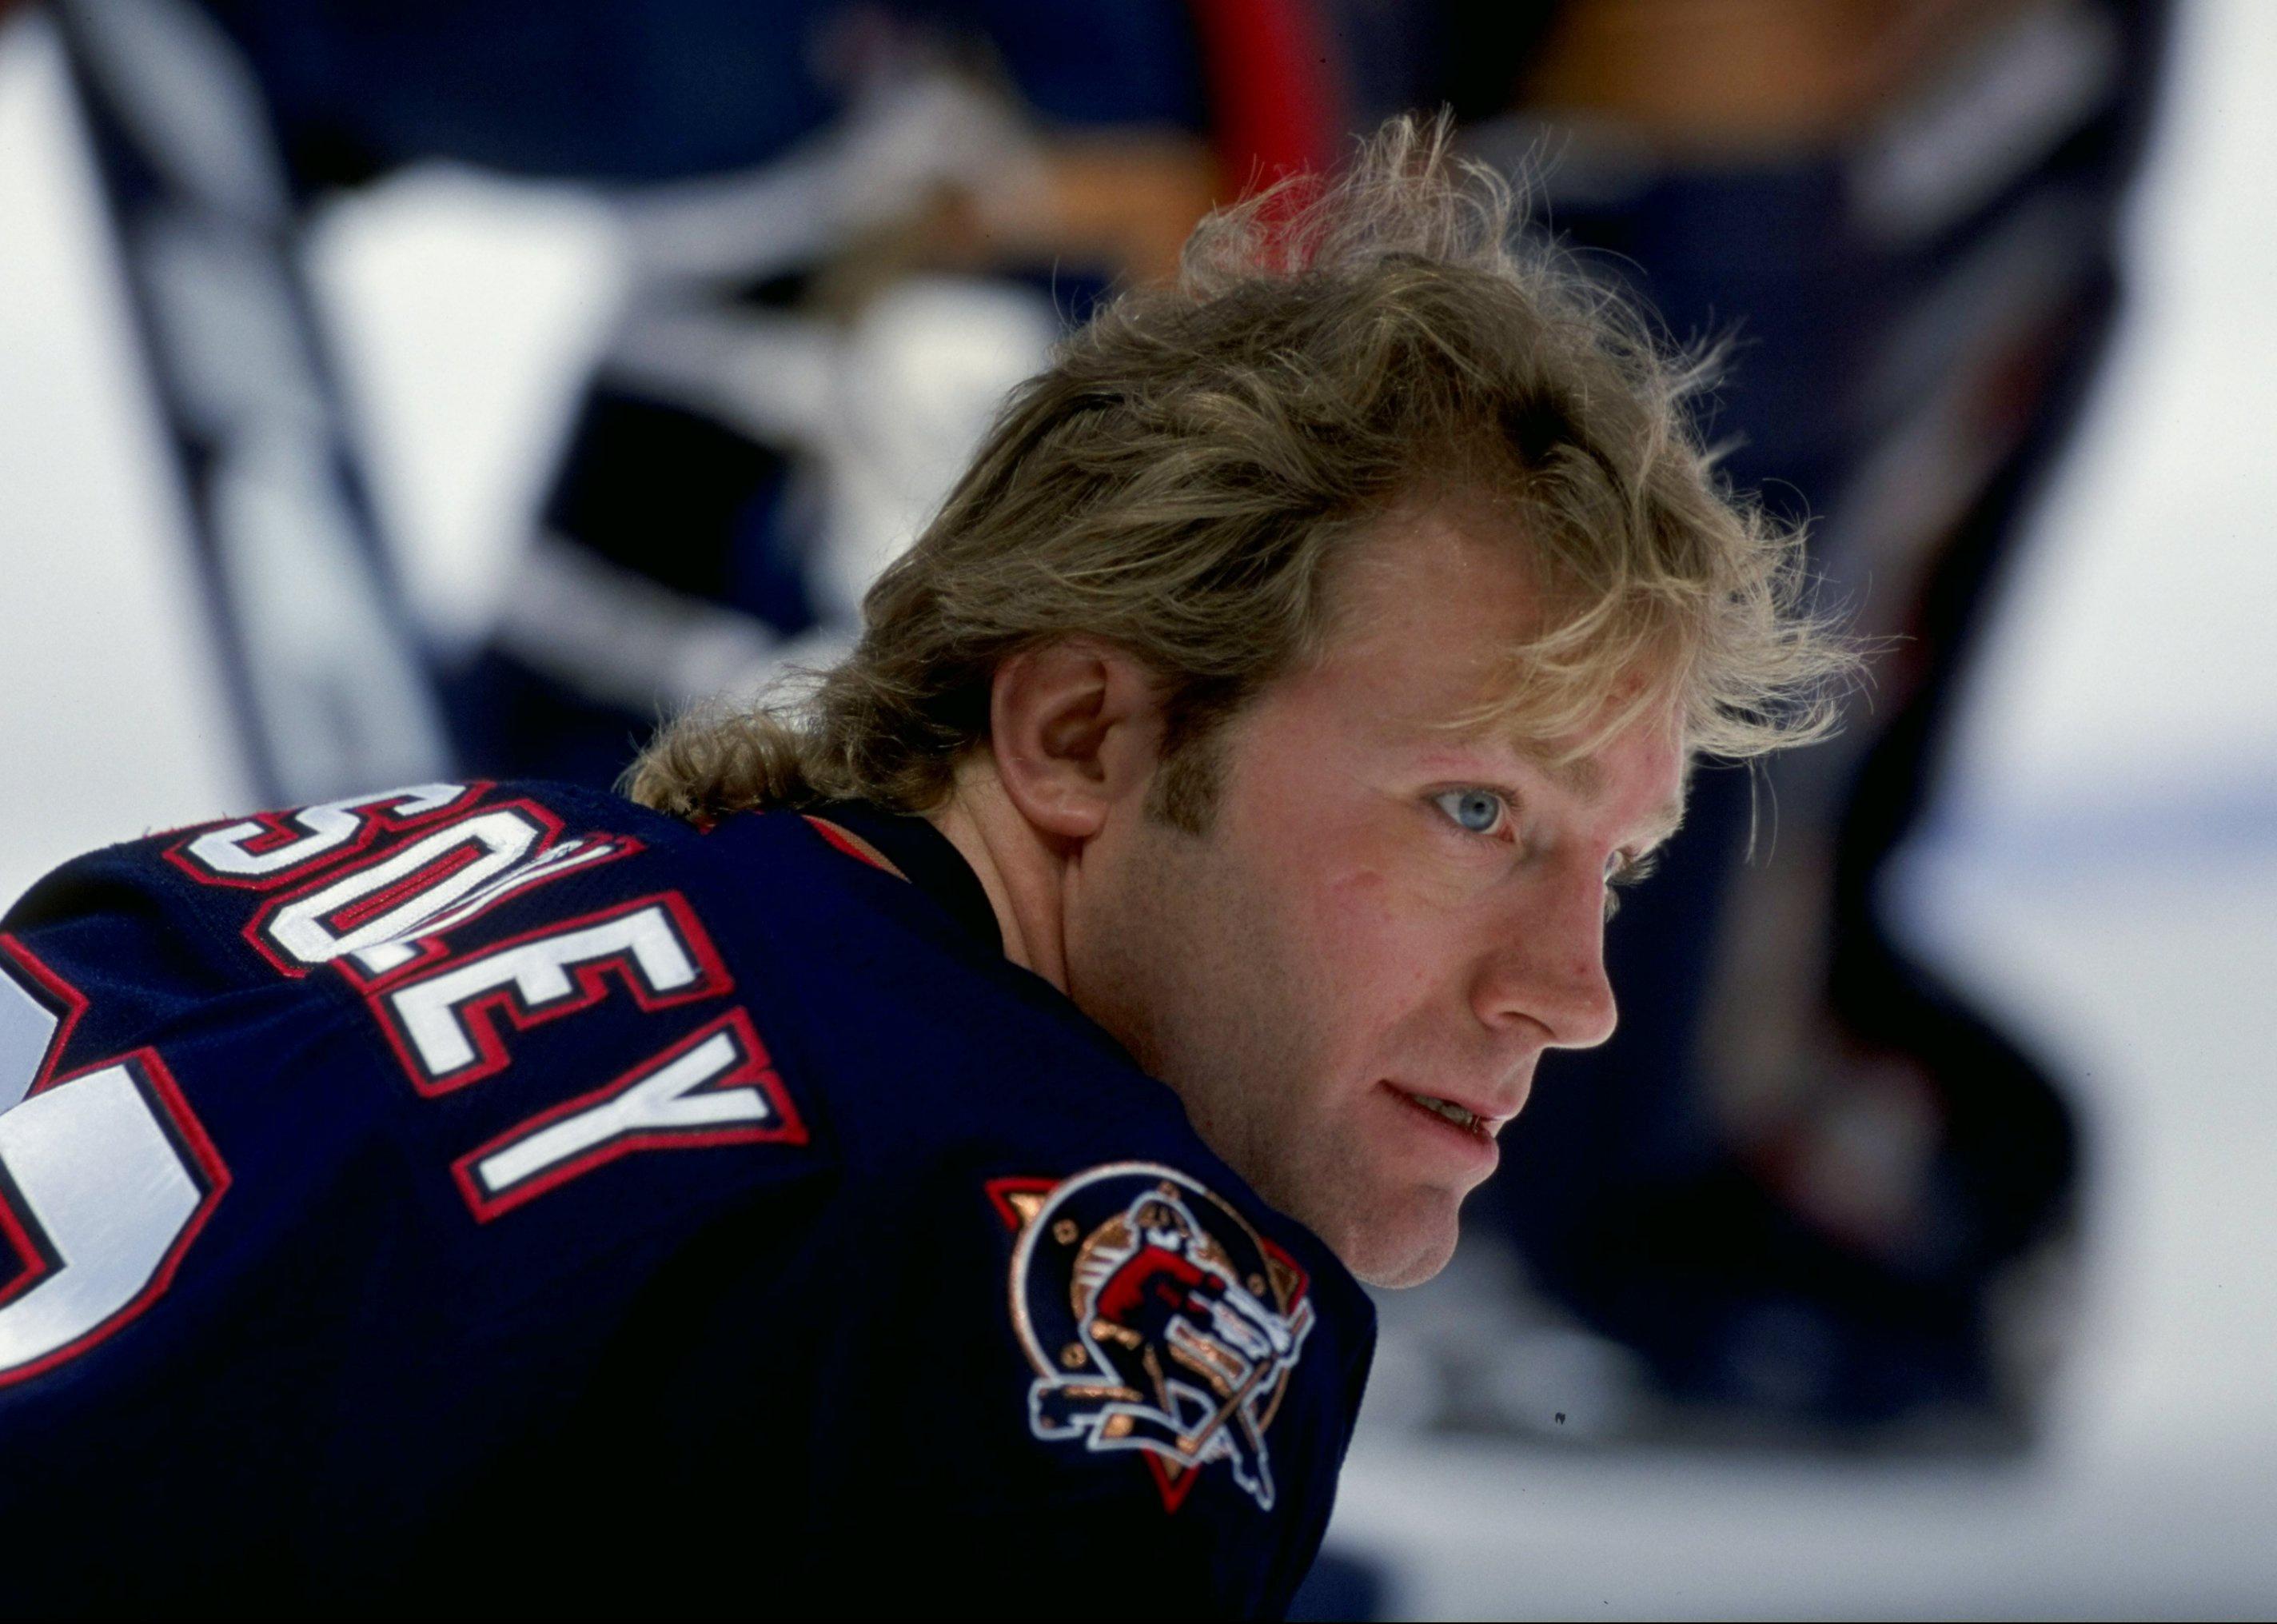 Marty McSorley looks on during a game.